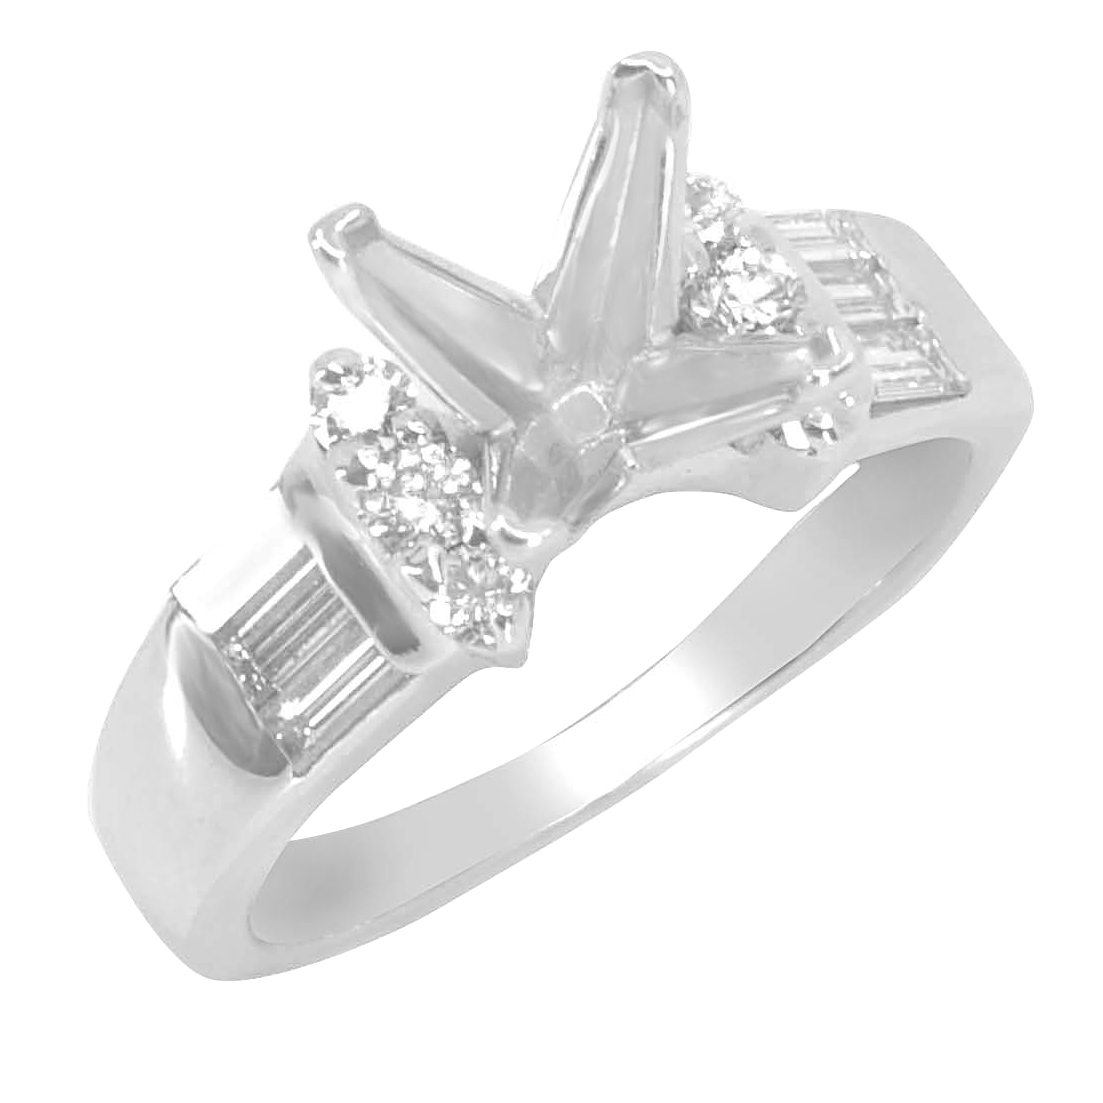 14K WHITE GOLD CATHEDRAL SEMI-MOUNTING CHANNEL SET RING